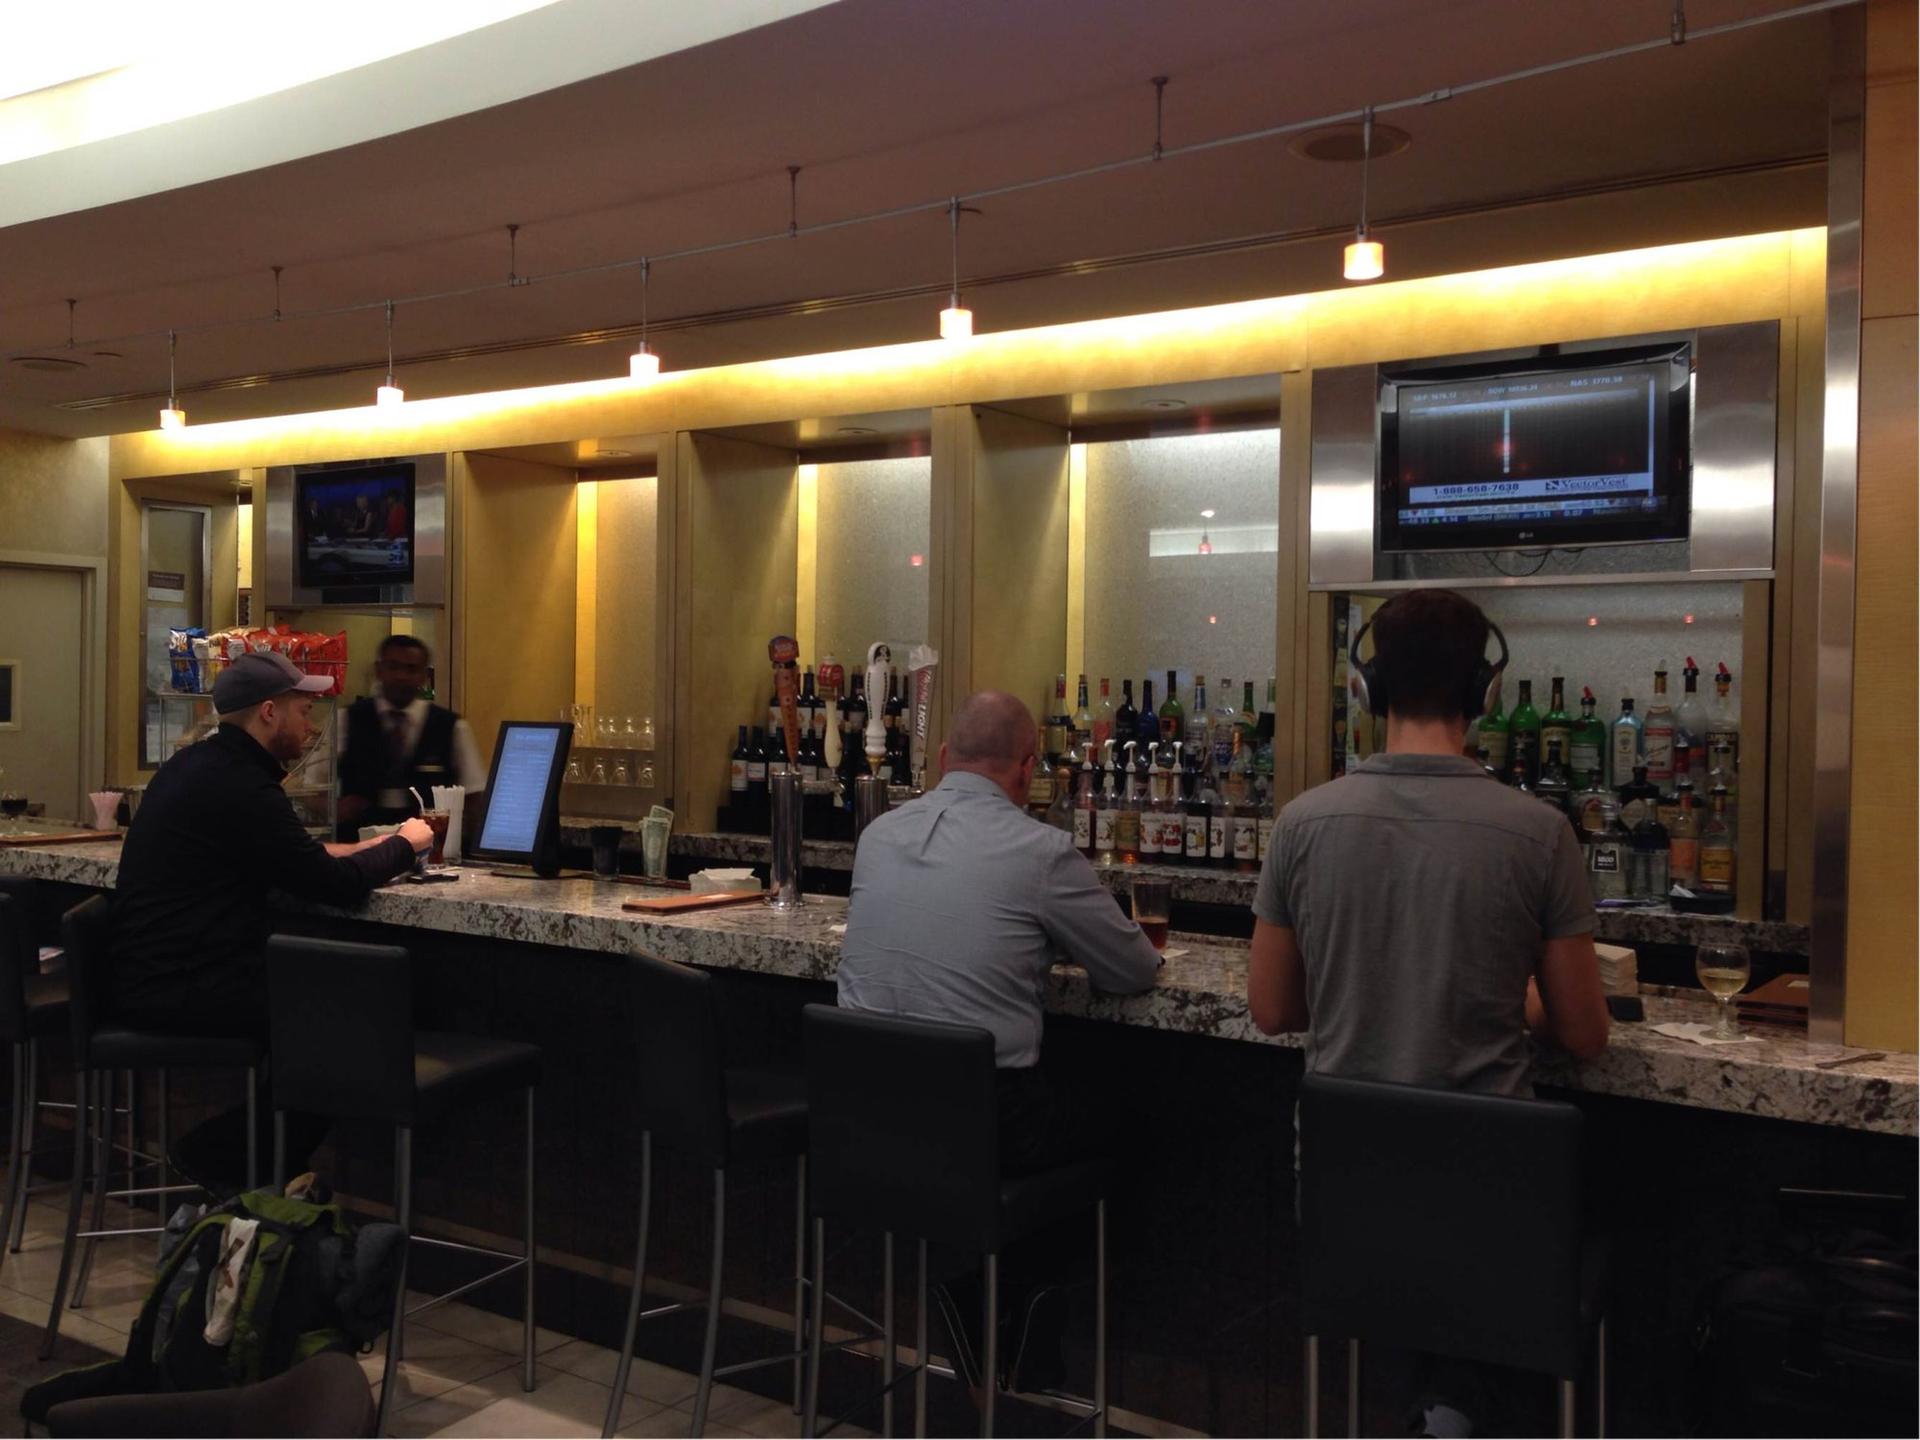 American Airlines Admirals Club image 12 of 25